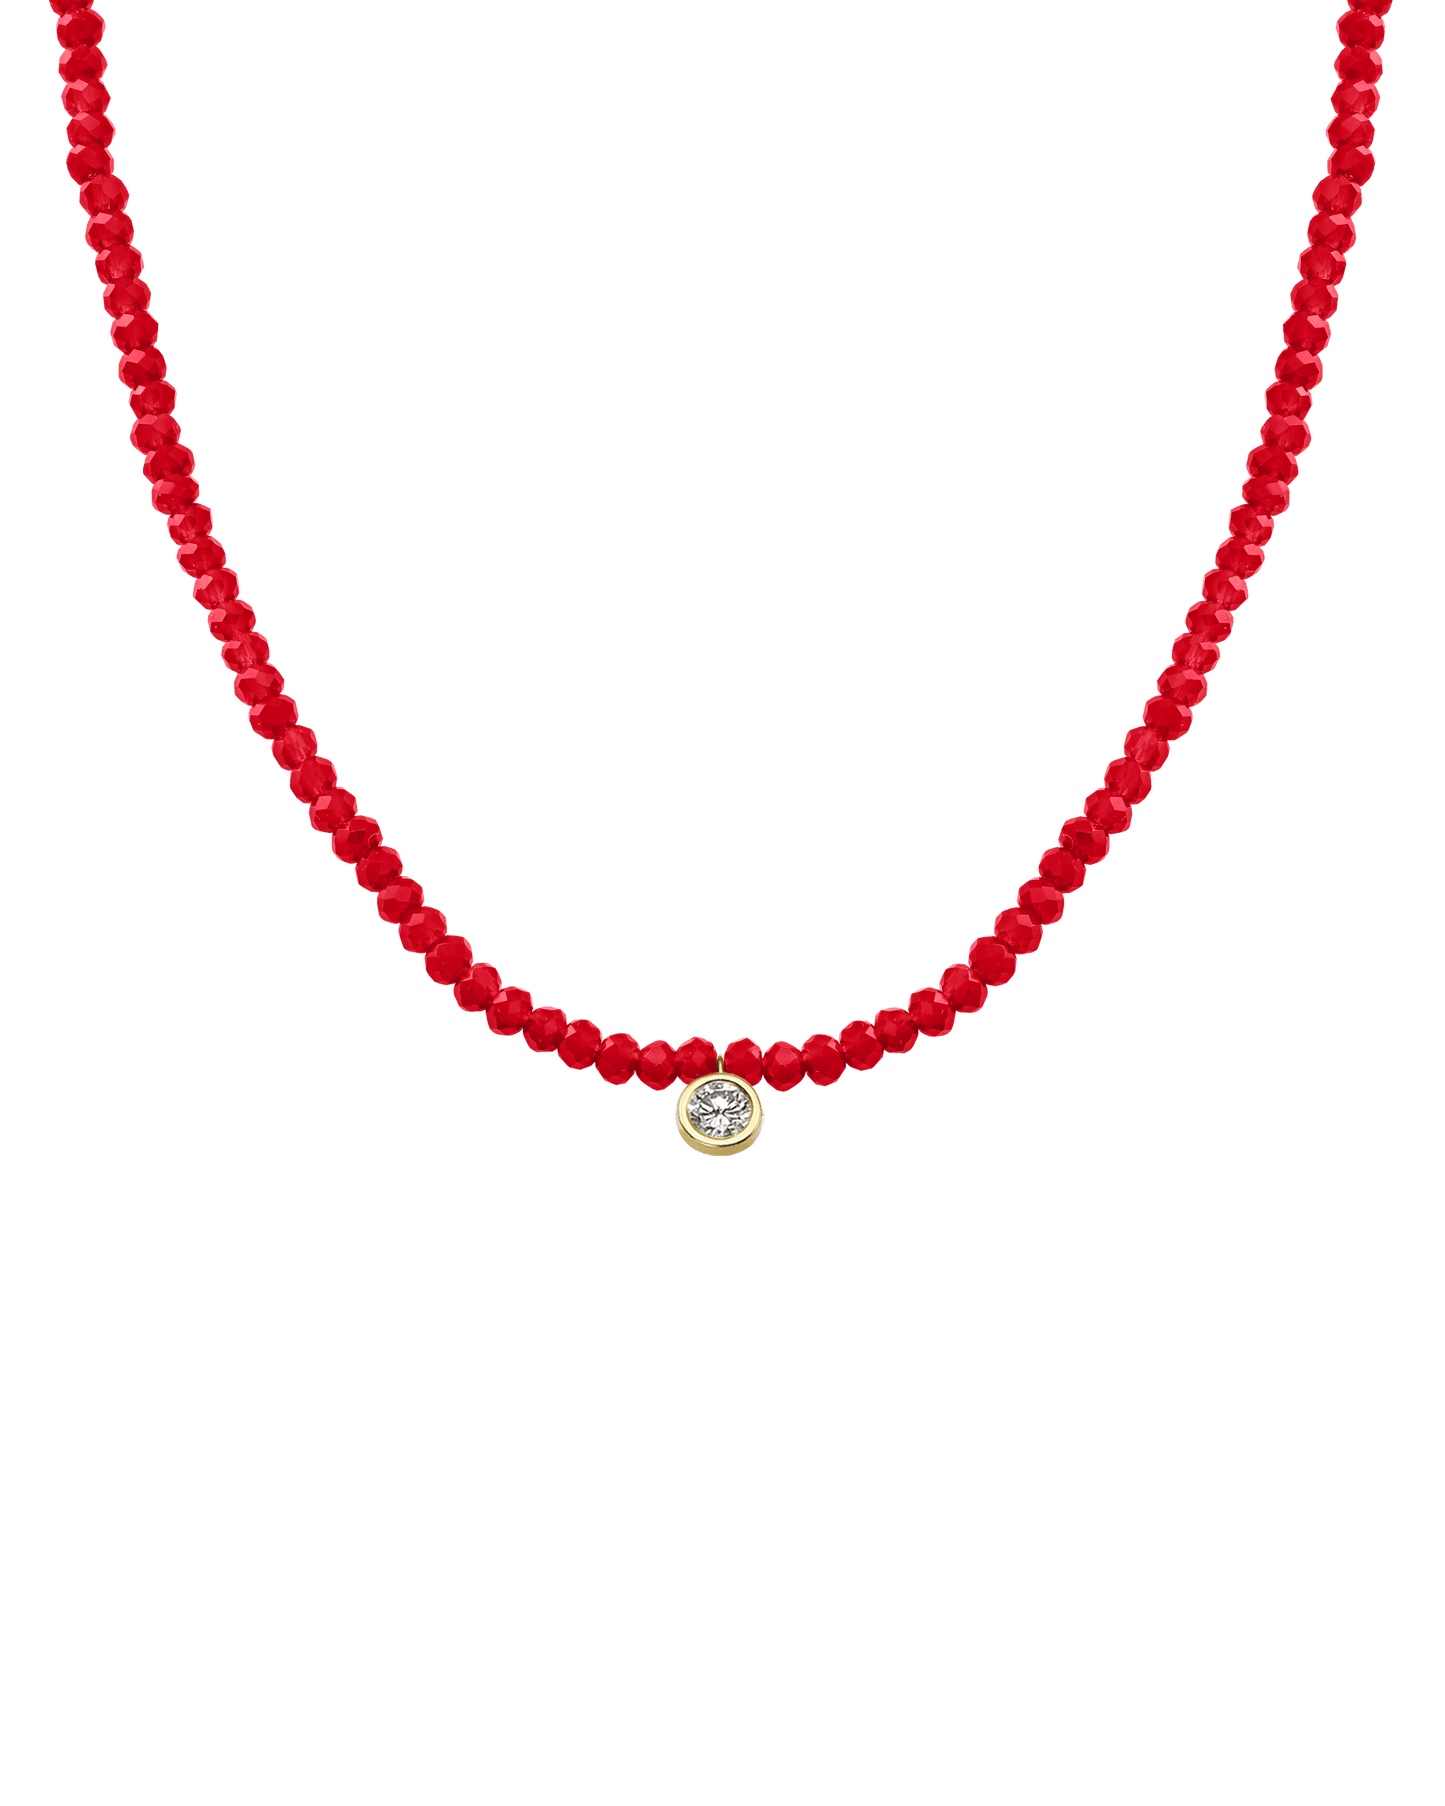 Apatite Gemstone & Diamond Necklace - 14K Yellow Gold Necklaces 14K Solid Gold Natural Red Jade Extra Large: 0.20ct 14"